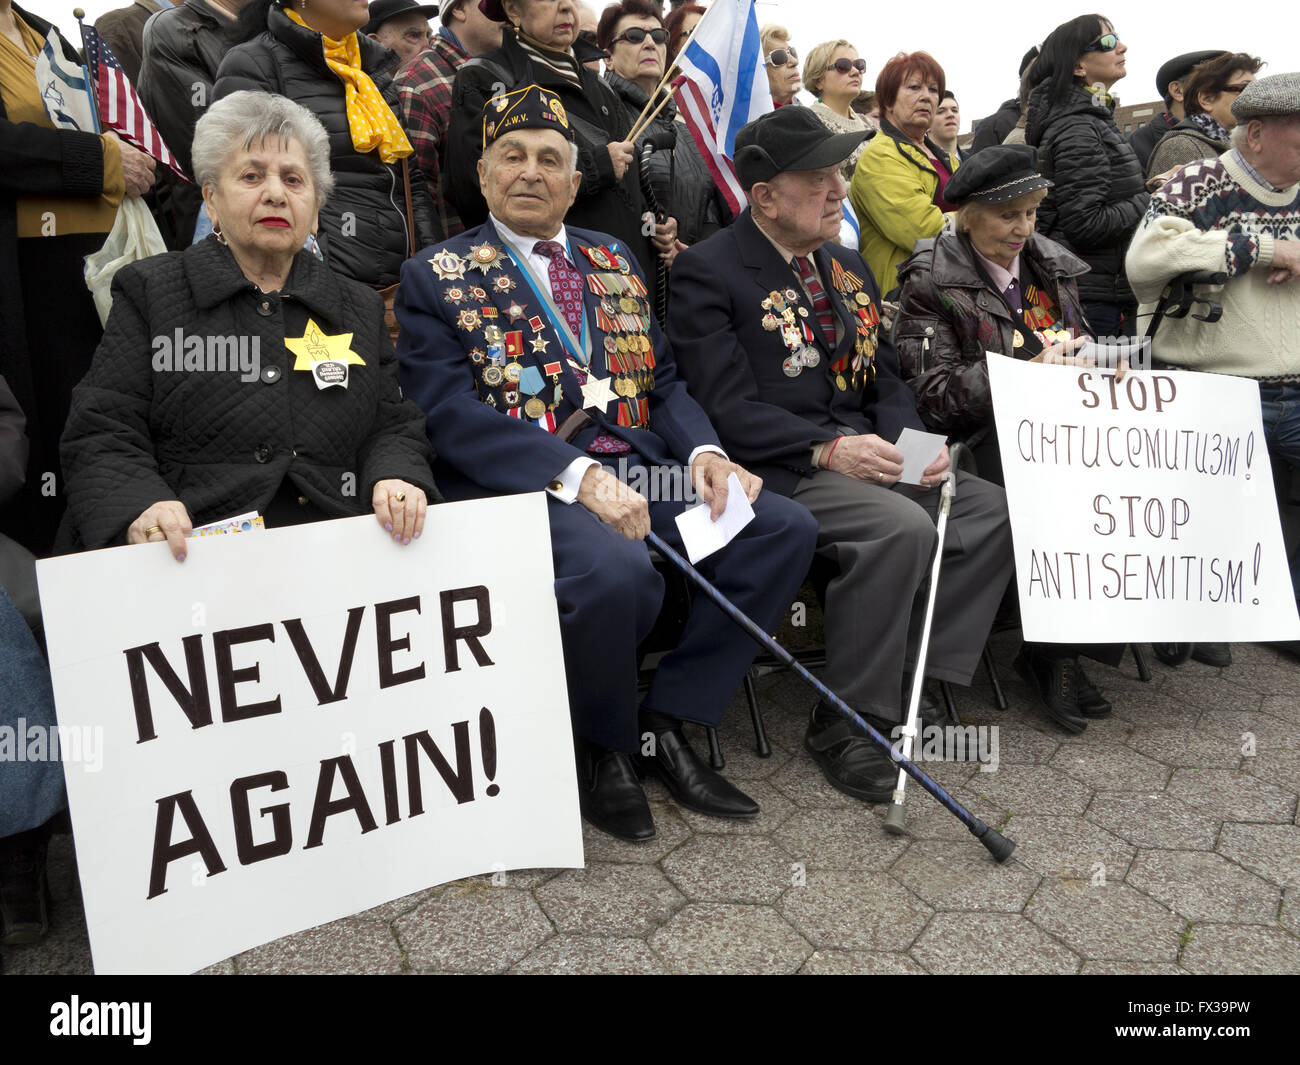 Rally against hatred and anti-semitism at the Holocaust Memorial Park in Sheepshead Bay in Brooklyn, NY, March 13, 2016.  Member Stock Photo